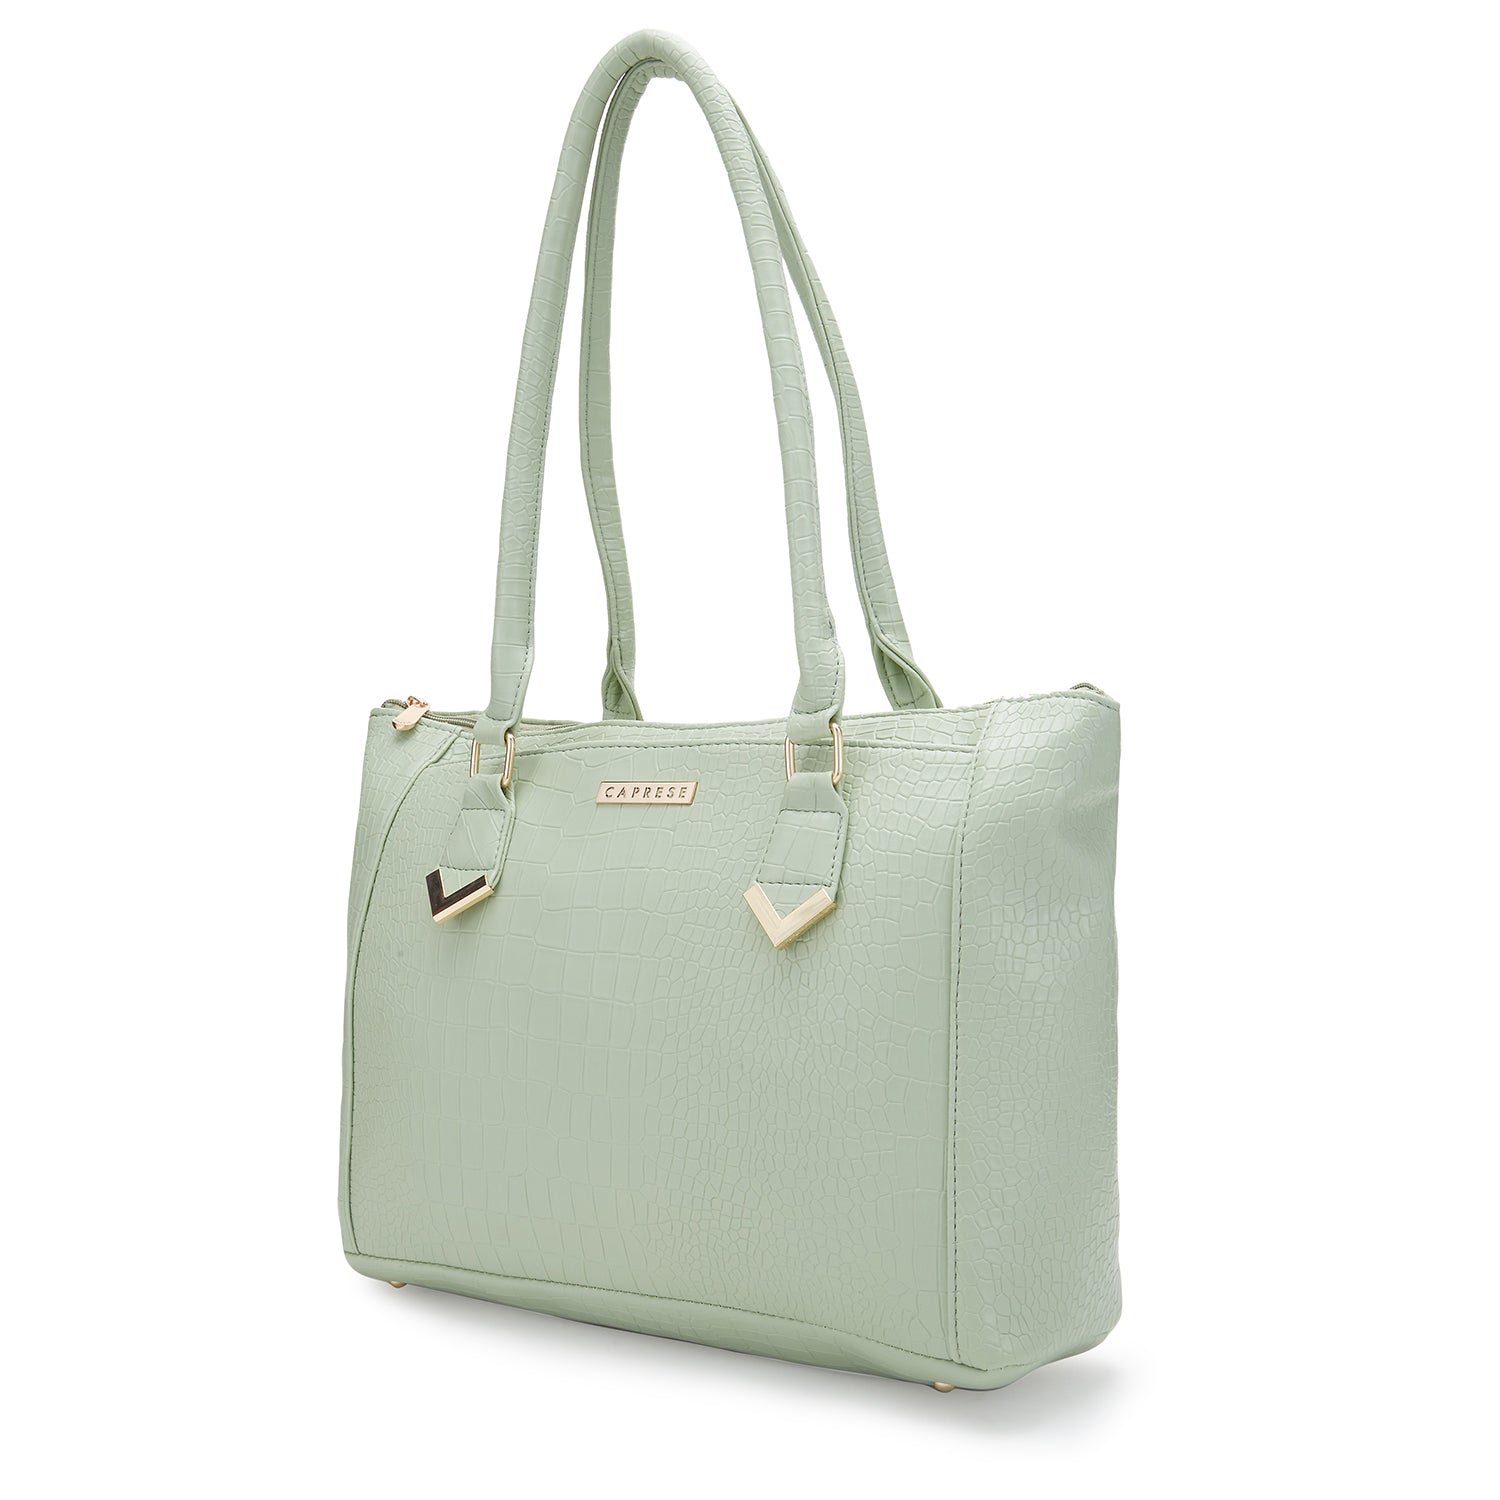 Caprese Alexandria Women's Sling Bag (Emerald) Price in India, Full  Specifications & Offers | DTashion.com